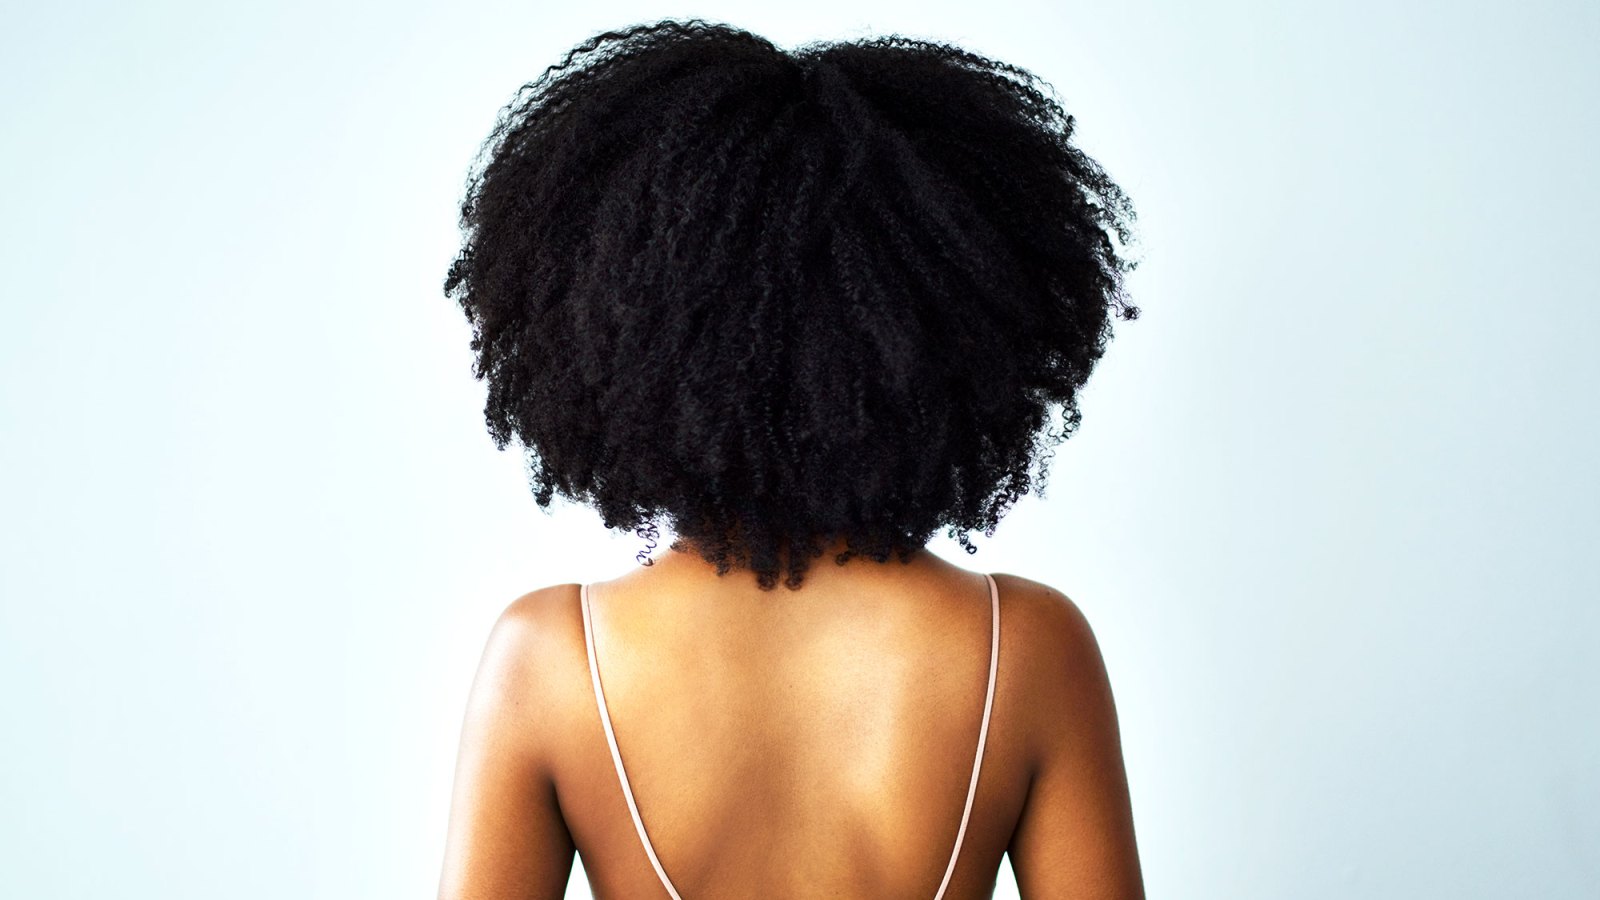 NYC Made It Illegal to Discriminate Against Natural Hair